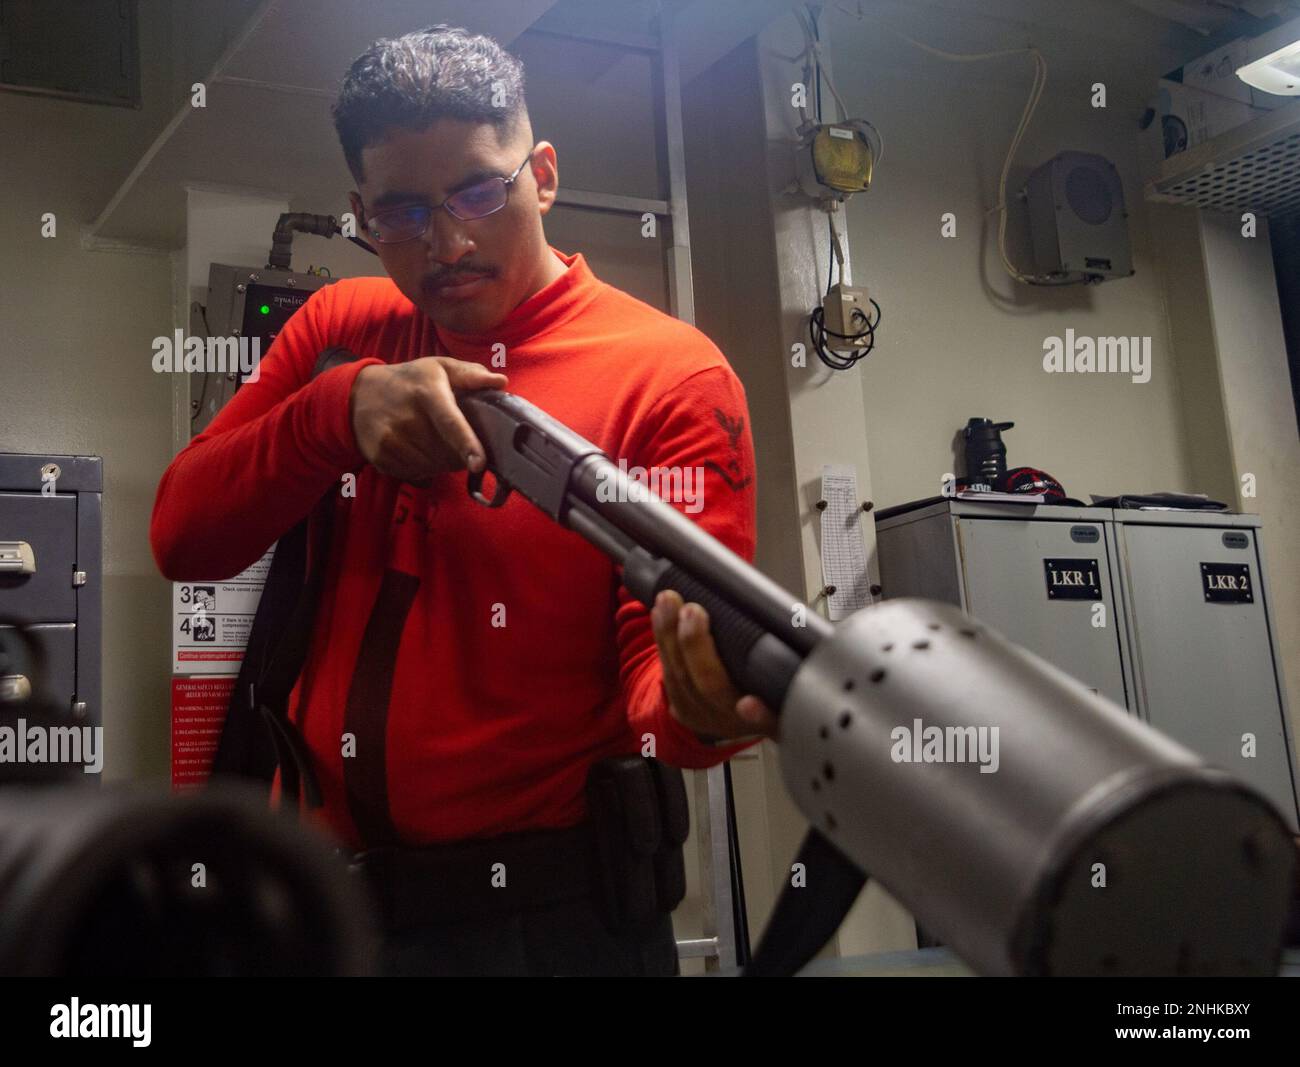 220730-N-YQ181-1032 SAN BERNARDINO STRAIT (July 30, 2022) Gunner’s Mate 3rd Class Alejandro Solano, from Chicago, performs a safety check on an M500 service shotgun in the armory aboard the U.S. Navy’s only forward-deployed aircraft carrier USS Ronald Reagan (CVN 76), in the San Bernardino Strait, July 30. Ronald Reagan, the flagship of Carrier Strike Group 5, provides a combat-ready force that protects and defends the United States, and supports alliances, partnerships and collective maritime interests in the Indo-Pacific region. Stock Photo